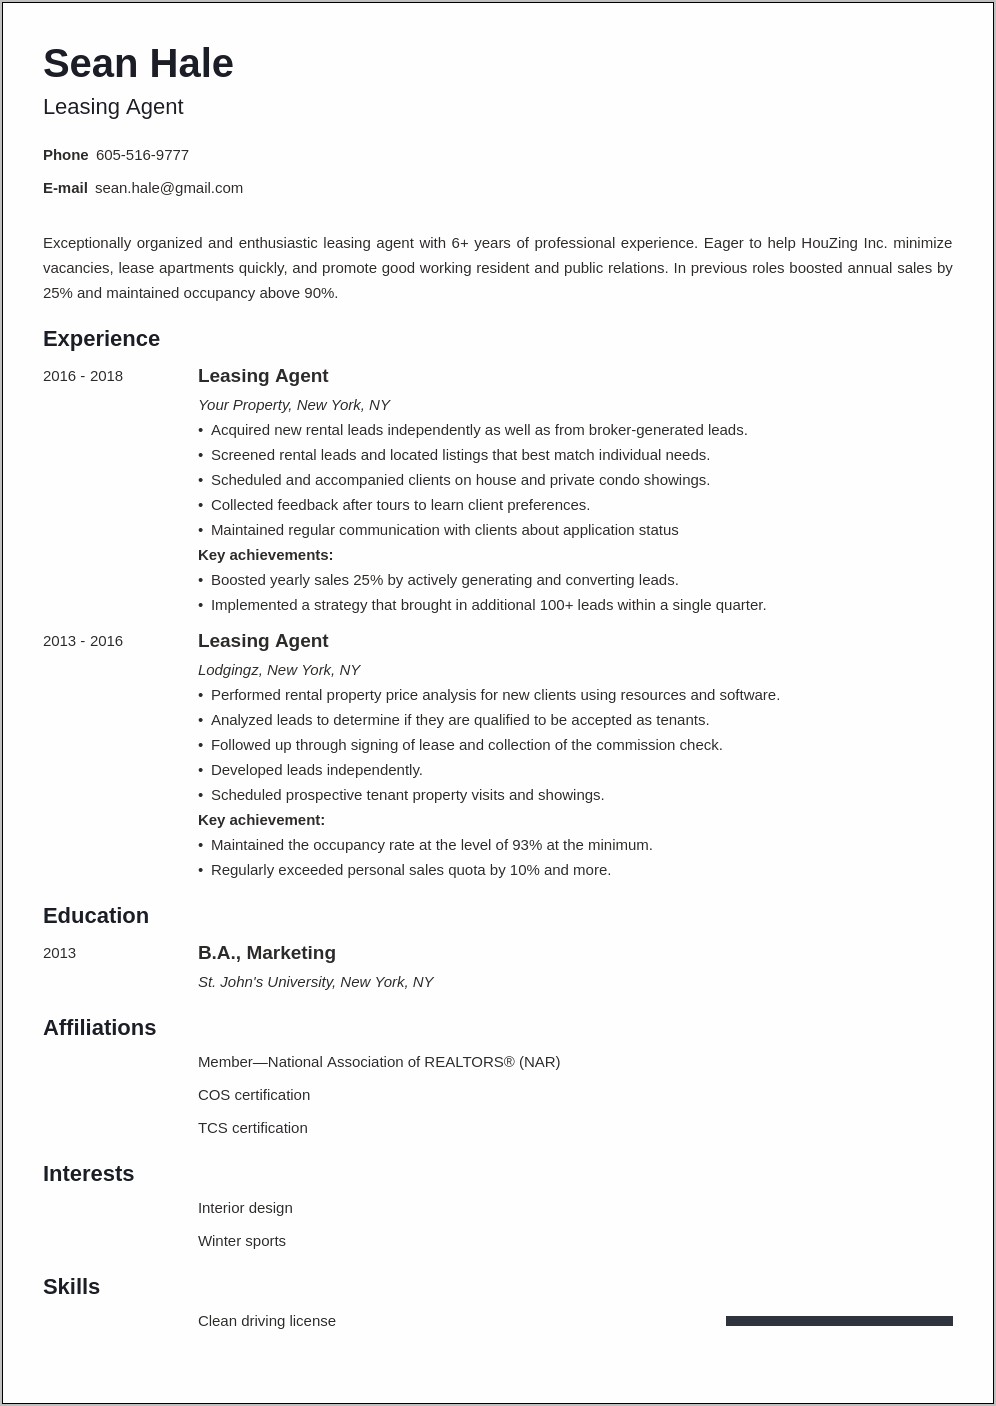 Sample Resumes For Leasing Consultants